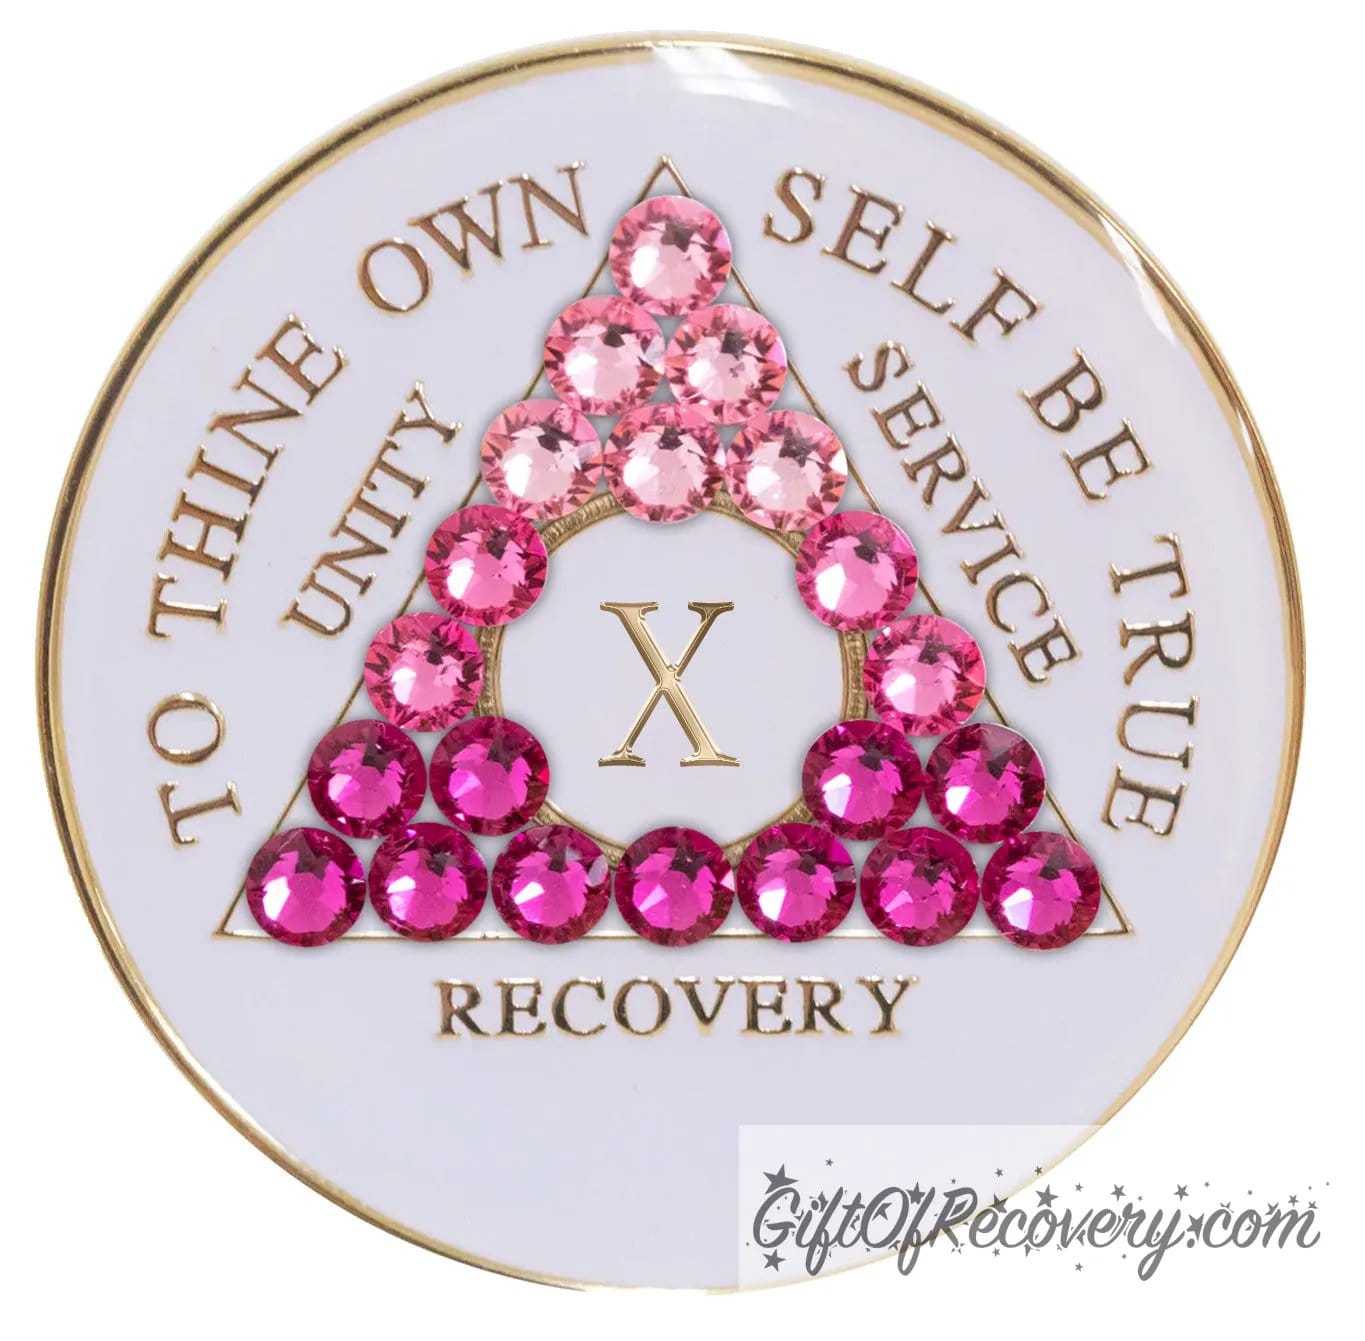 10 year pearl white AA medallion with 21 genuine crystals in the shape of the triangle and ranging from light to dark pink, representing the transformation of your sobriety journey, the AA moto along with the roman numeral and rim of medallion are 14k gold plated brass and sealed with resin for a glossy finish.